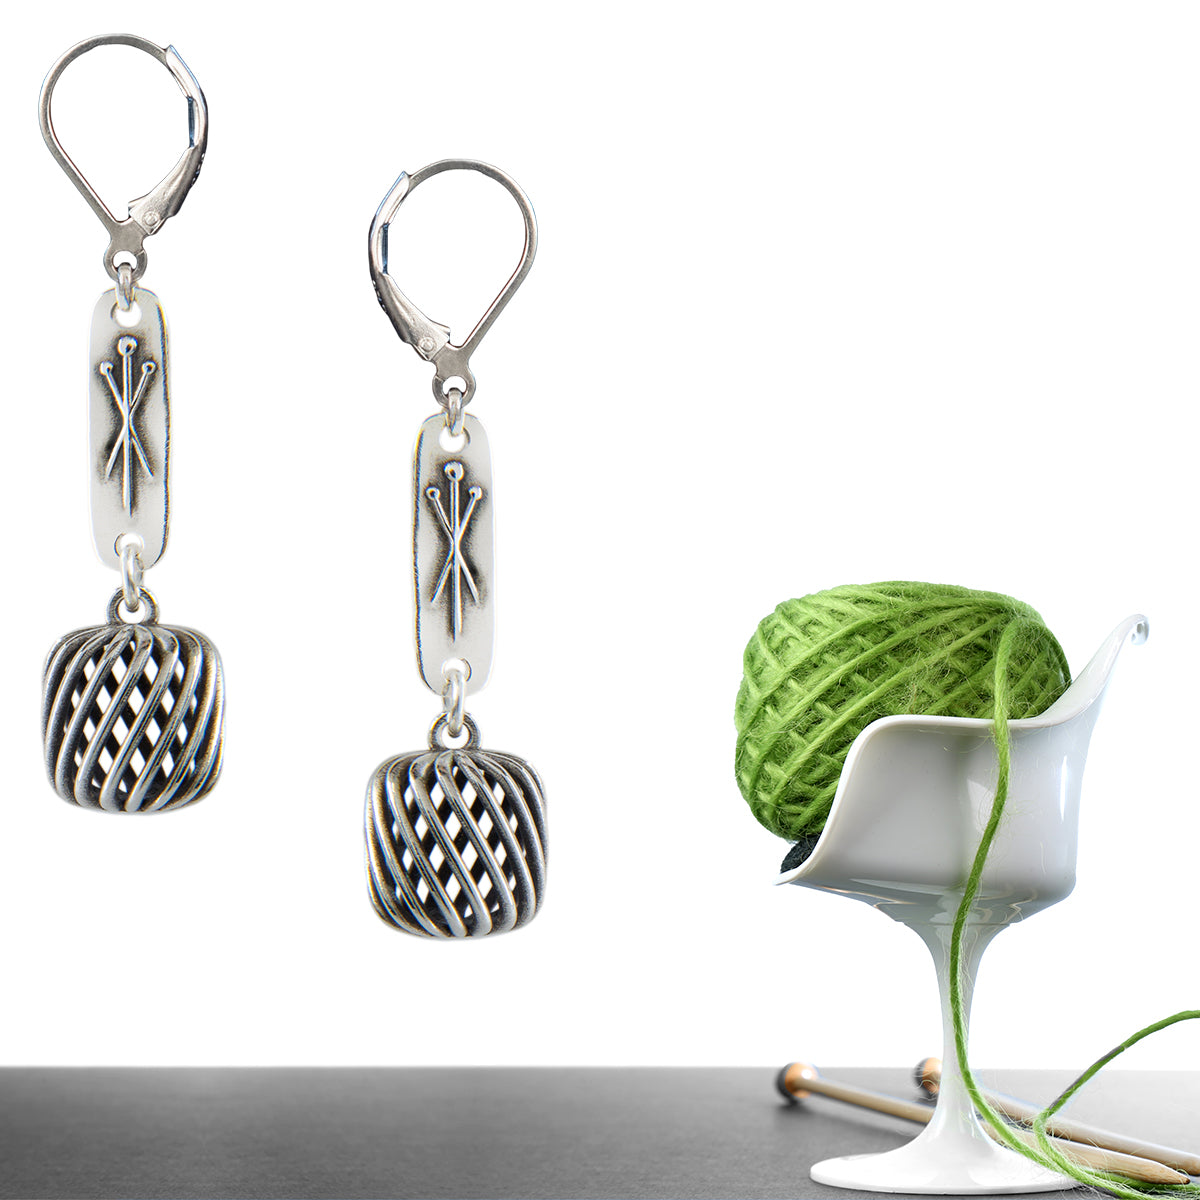 Cake and Needles Earrings in Sterling Silver